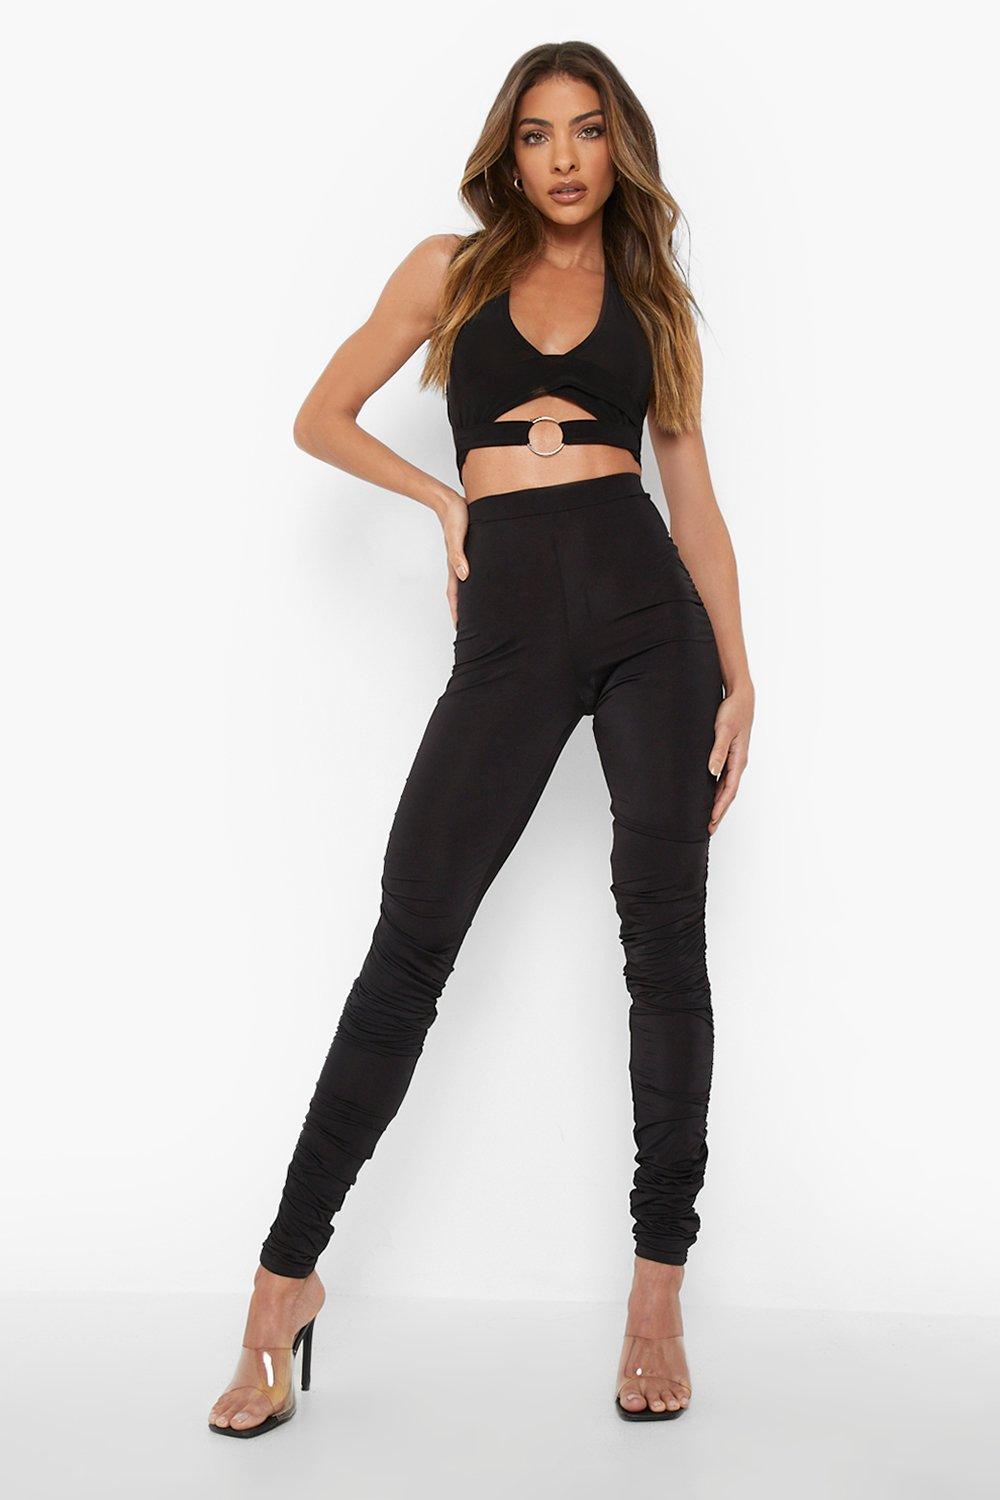 Ruched Slinky High Waisted Leggings